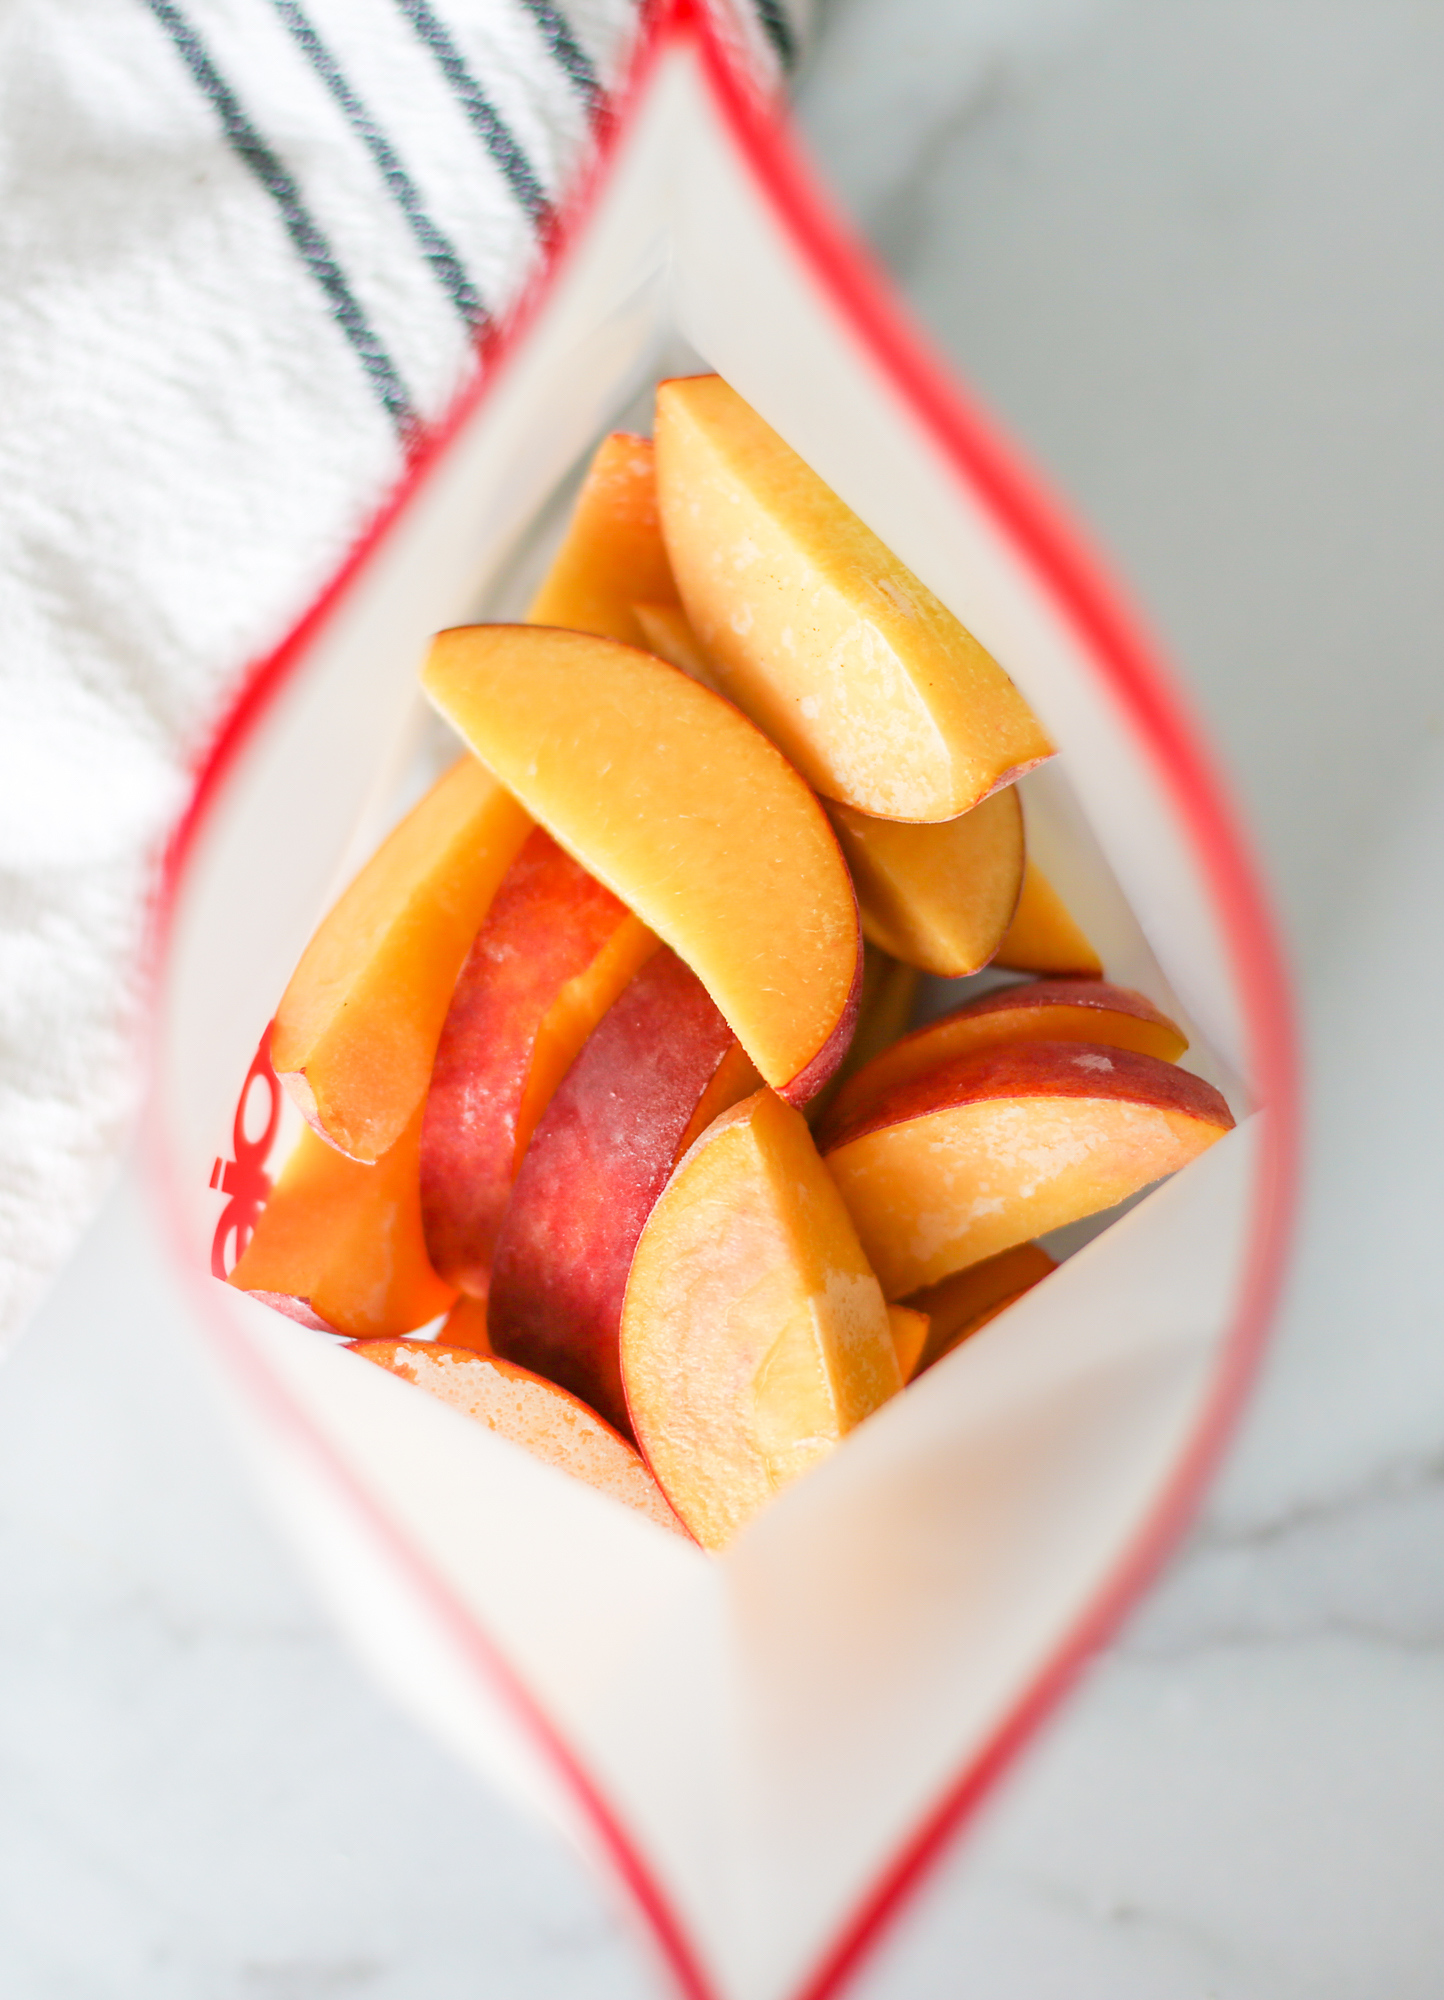 Peach slices that have been flash frozen in a reusable freezer-safe bag.